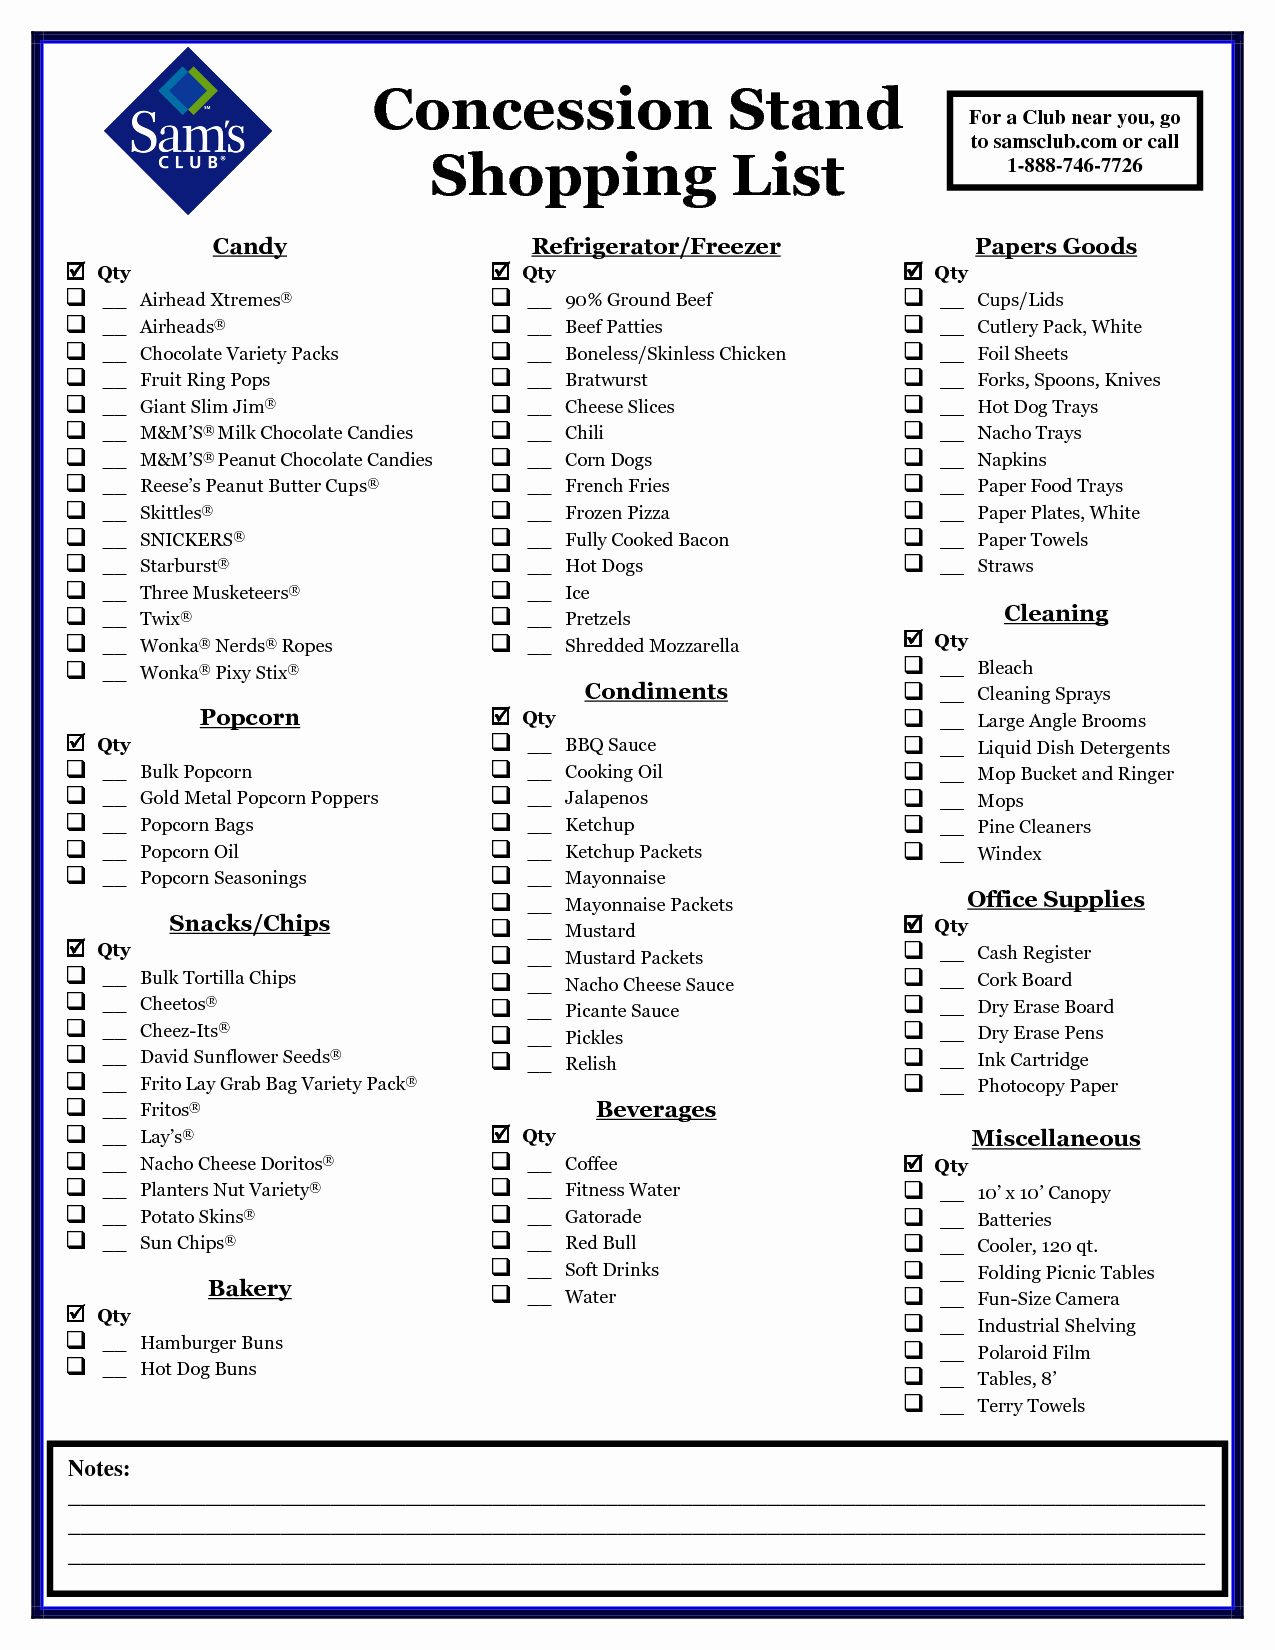 Concession Stand Sign Up Sheet Awesome Shopping List … Concession Stand Pinterest